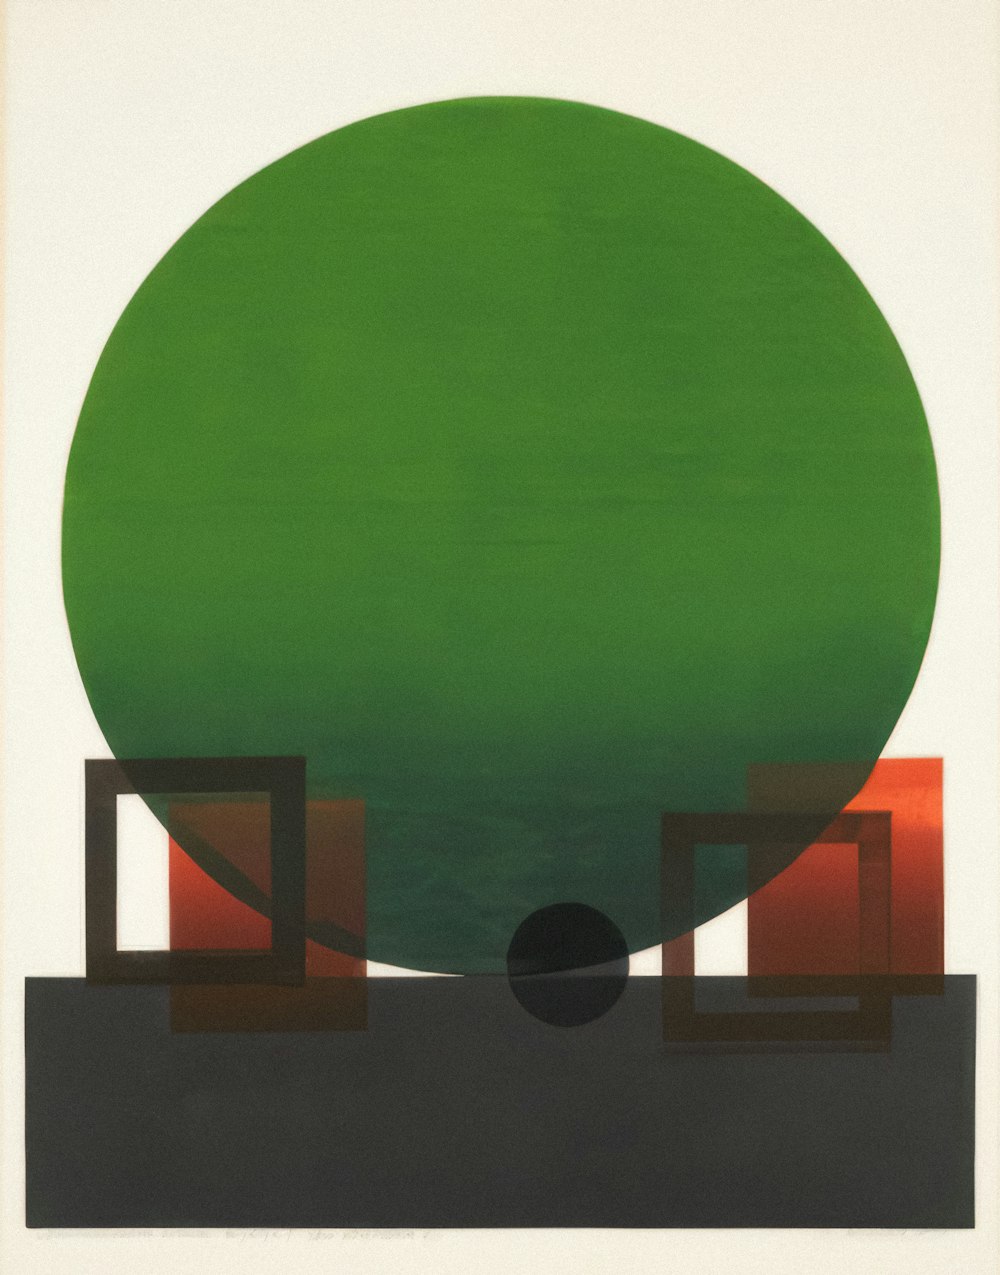 a painting of a large green ball on a white background